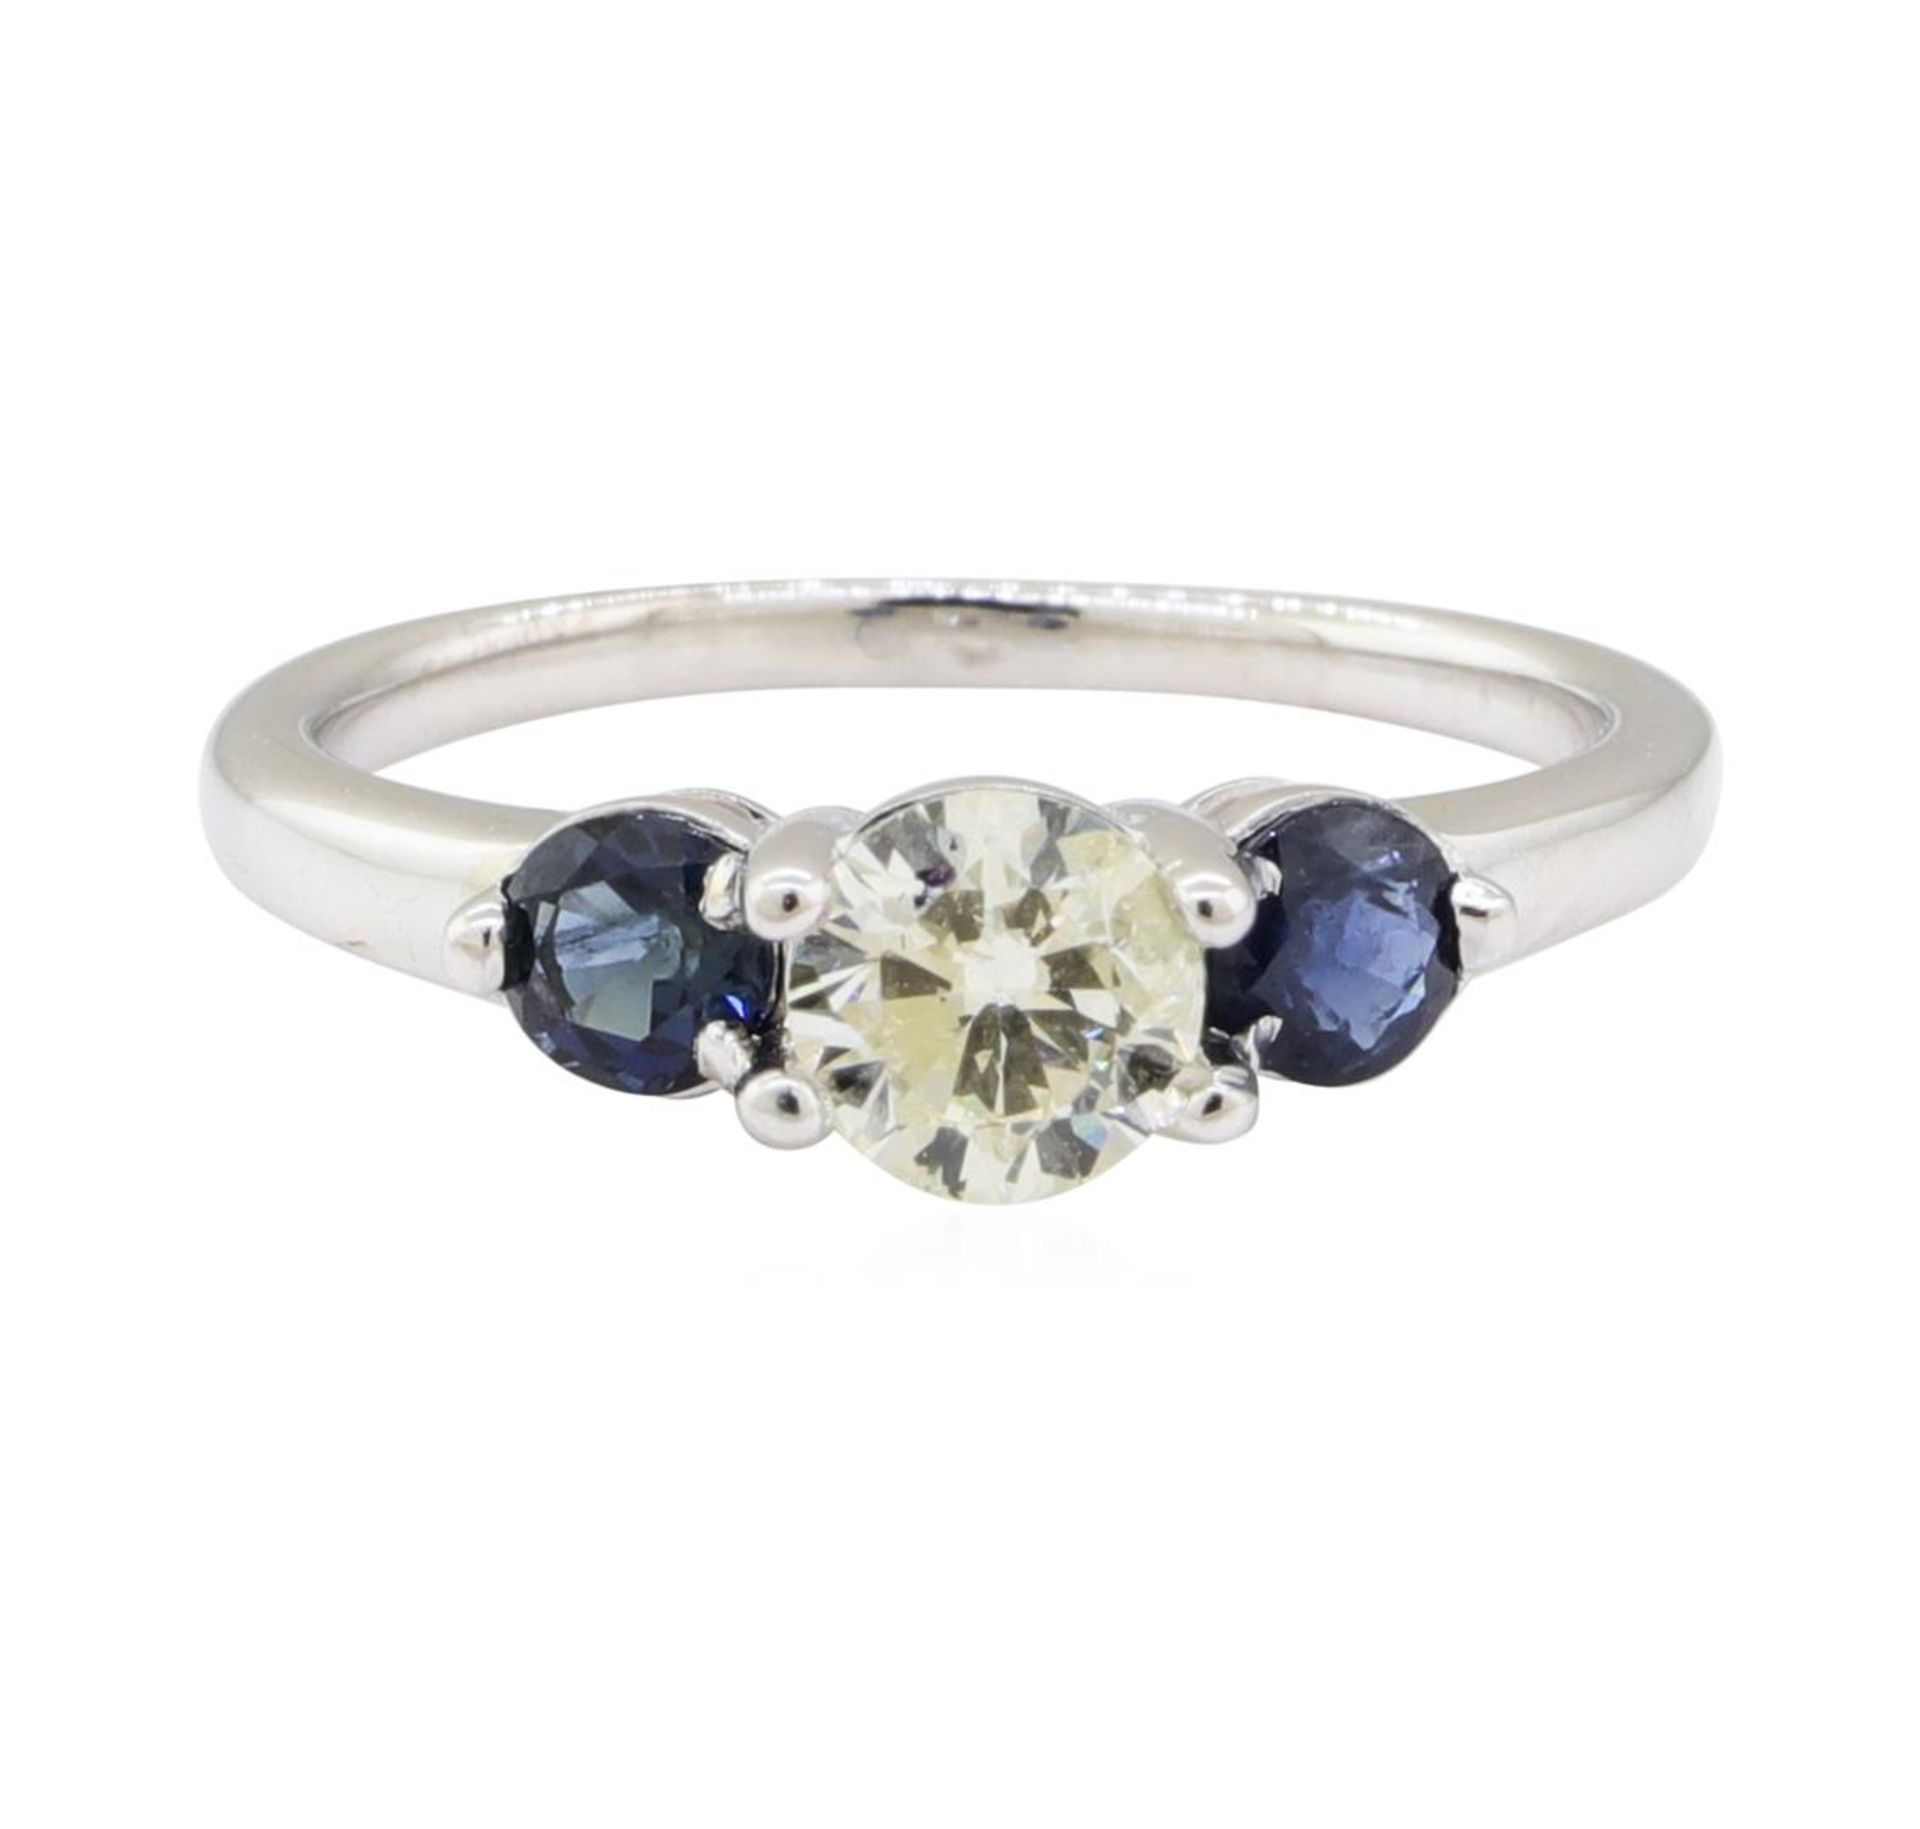 0.90 ctw Diamond and Sapphire Ring - 14KT White Gold - Image 2 of 4